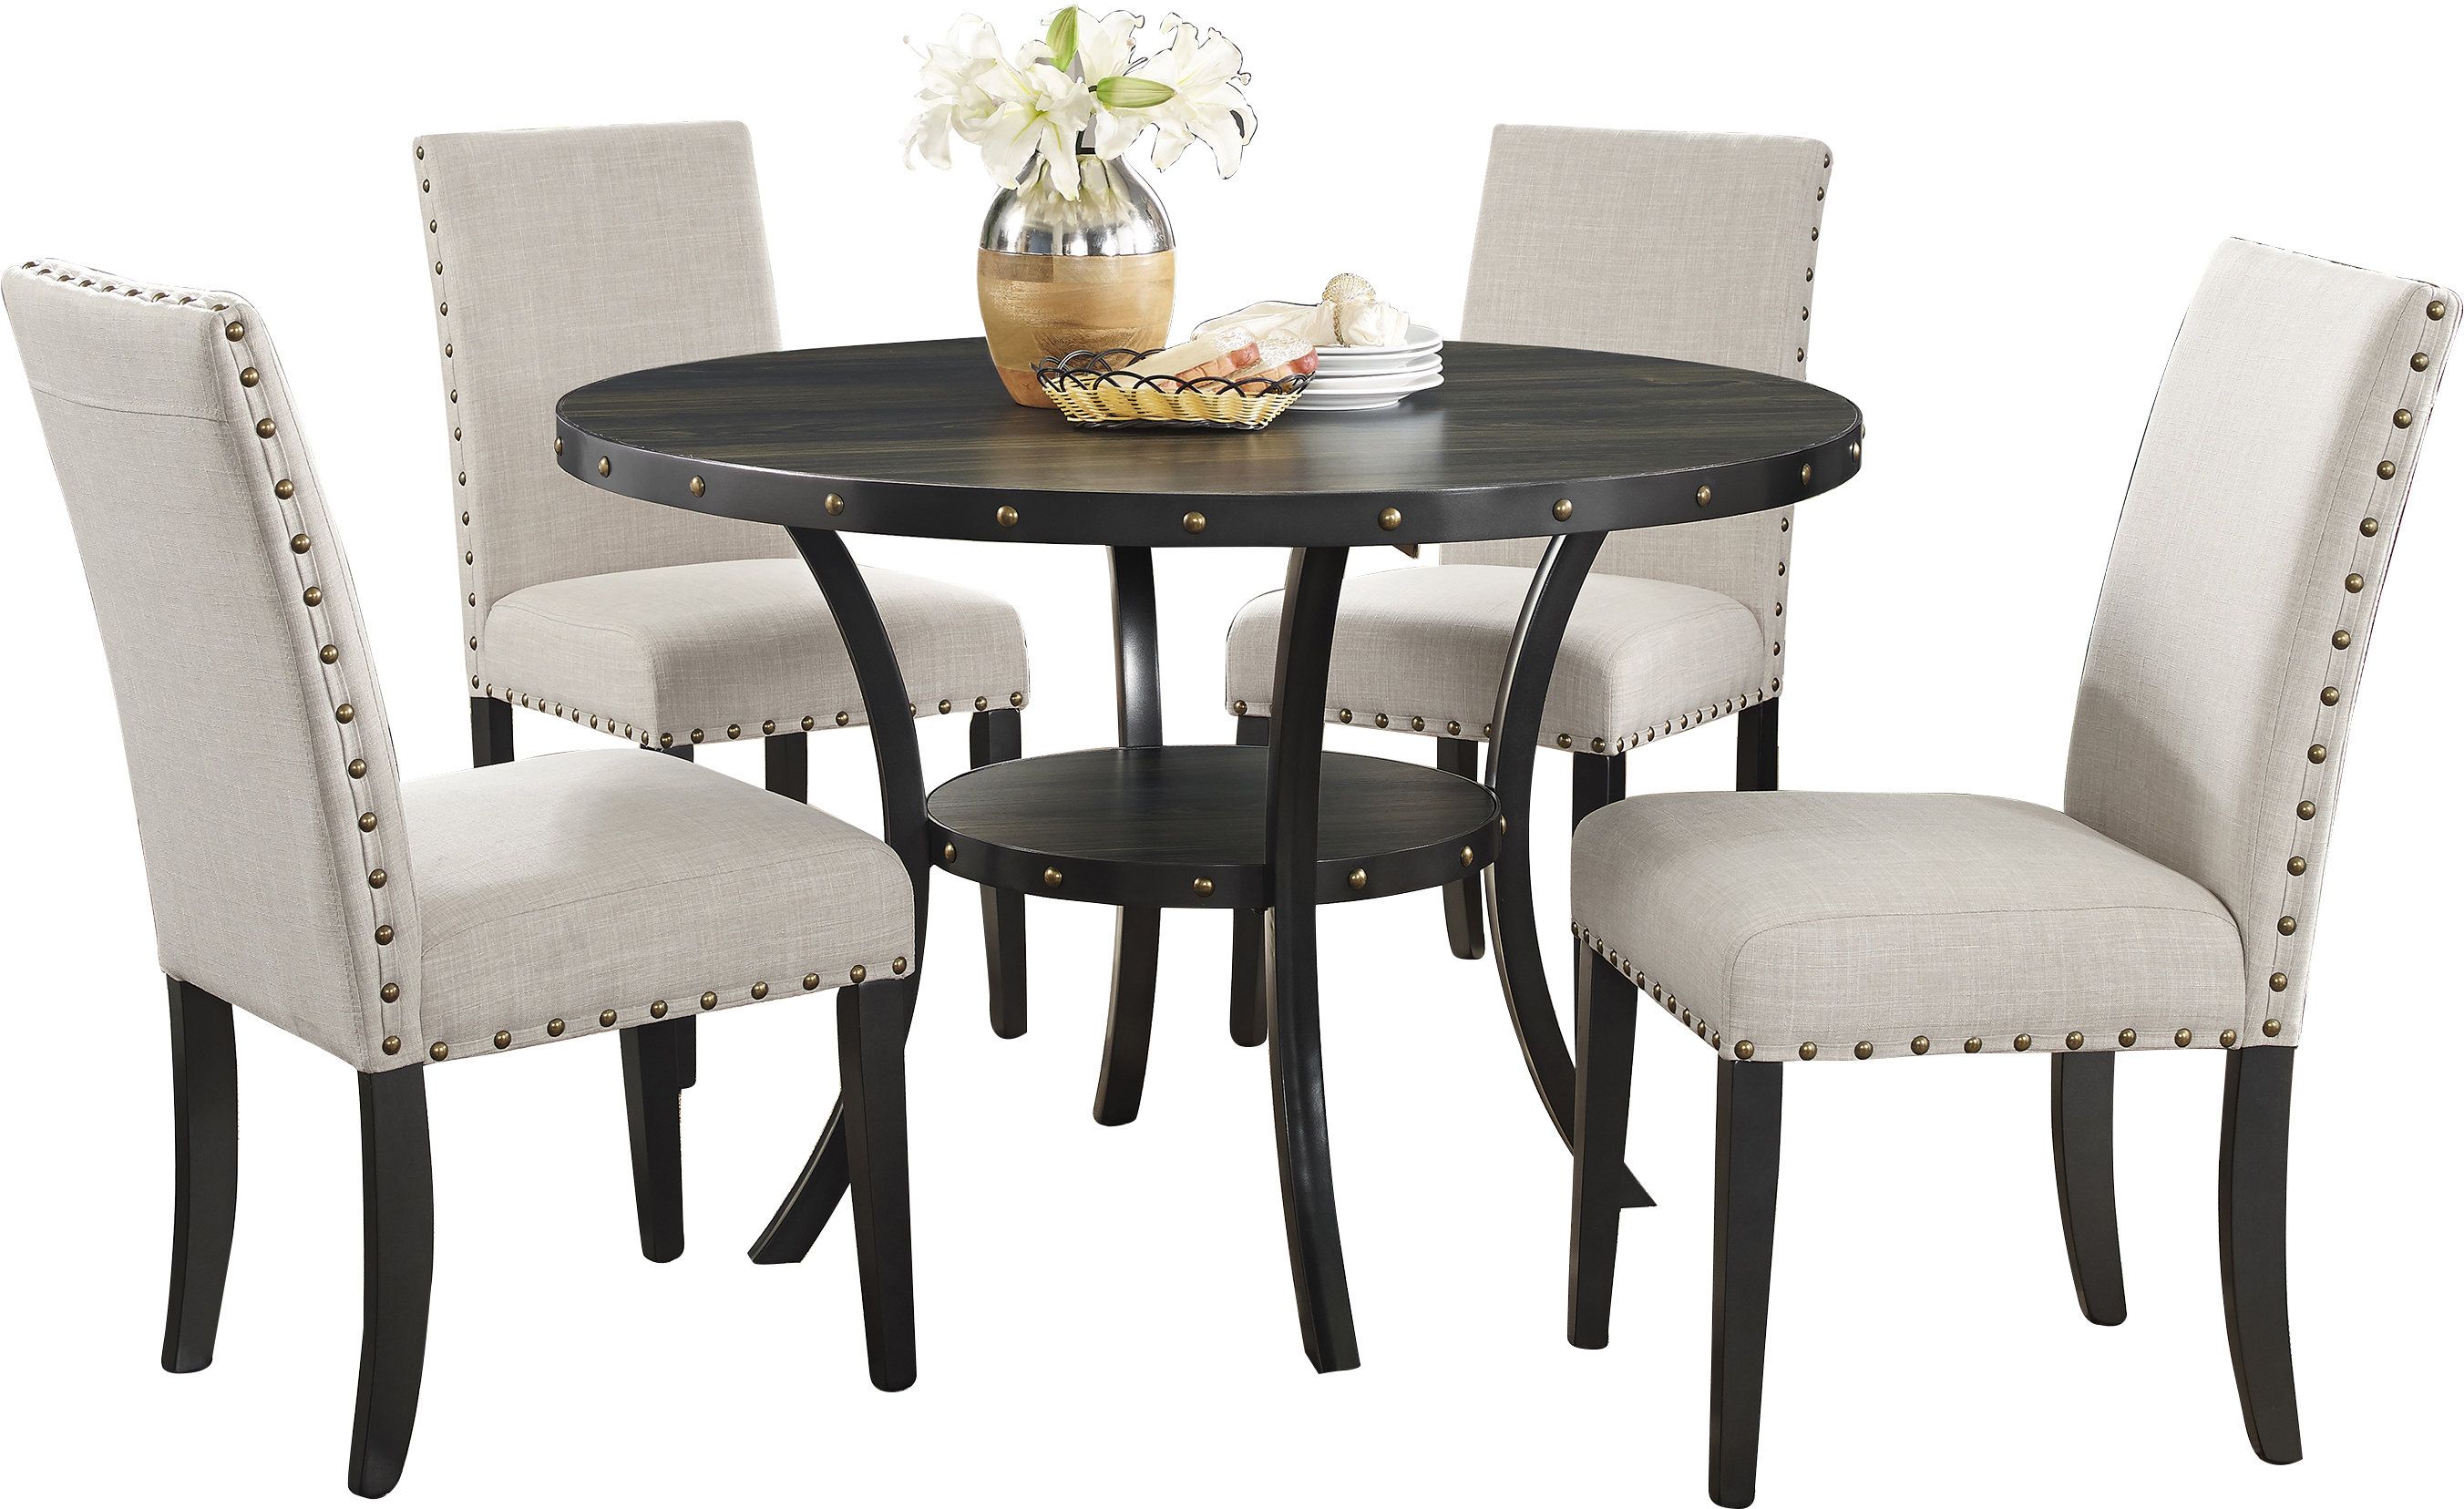 Newest Baxton Studio Keitaro 5 Piece Dining Sets In Gracie Oaks Amy 5 Piece Dining Set (View 10 of 20)